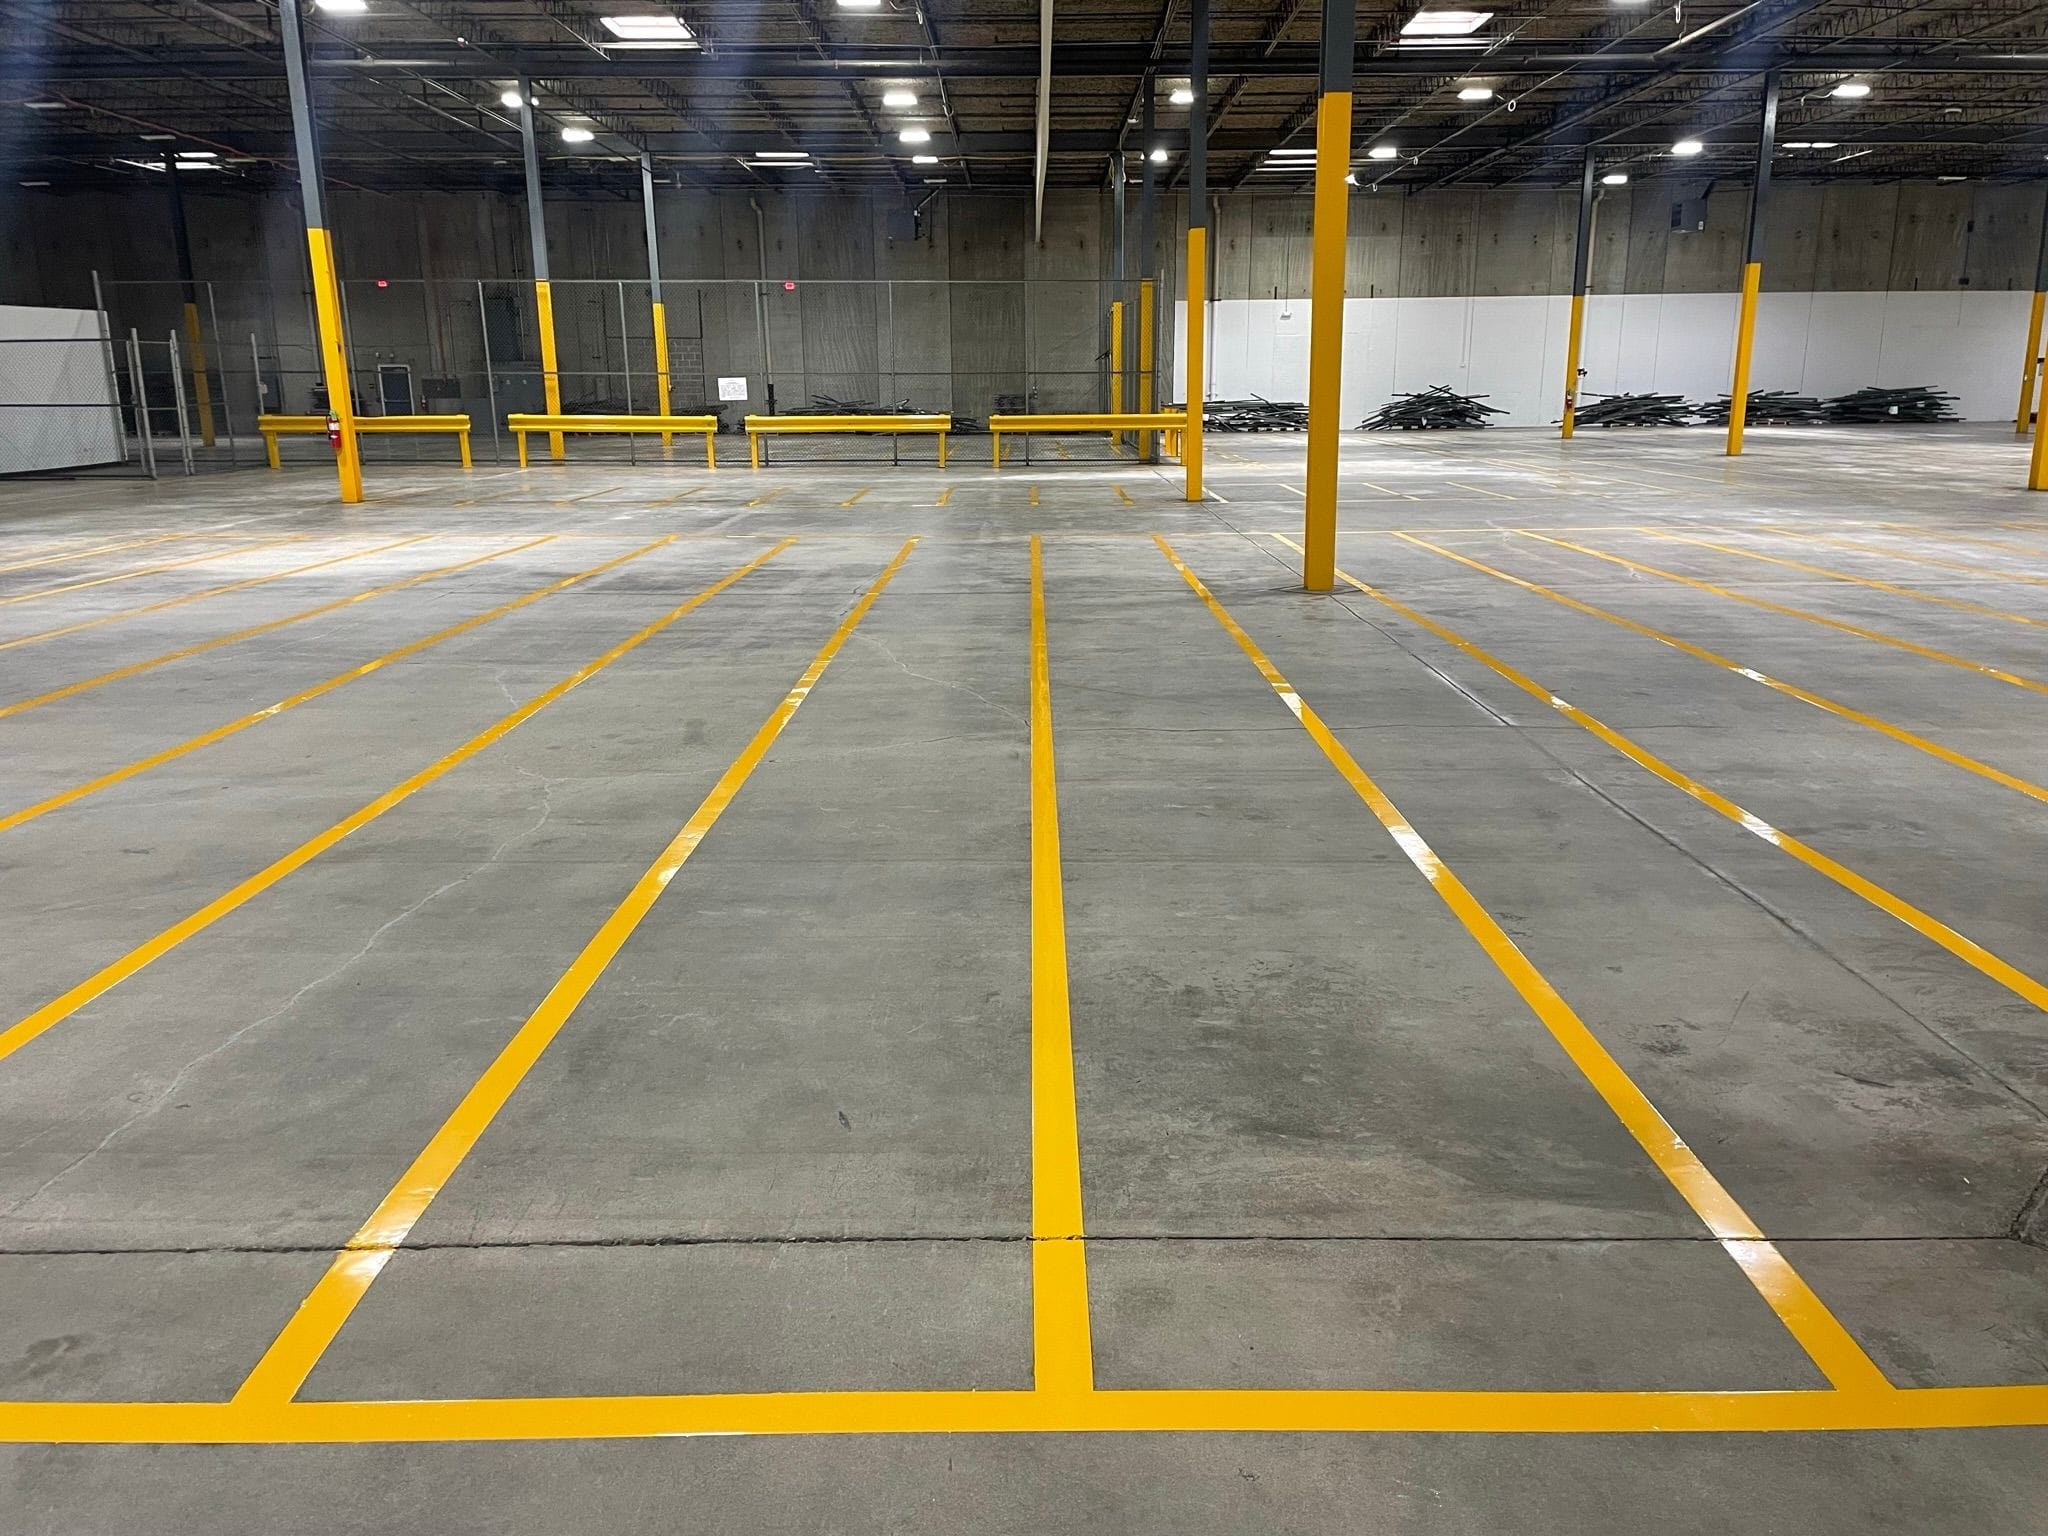 Customized line striping on a warehouse floor.